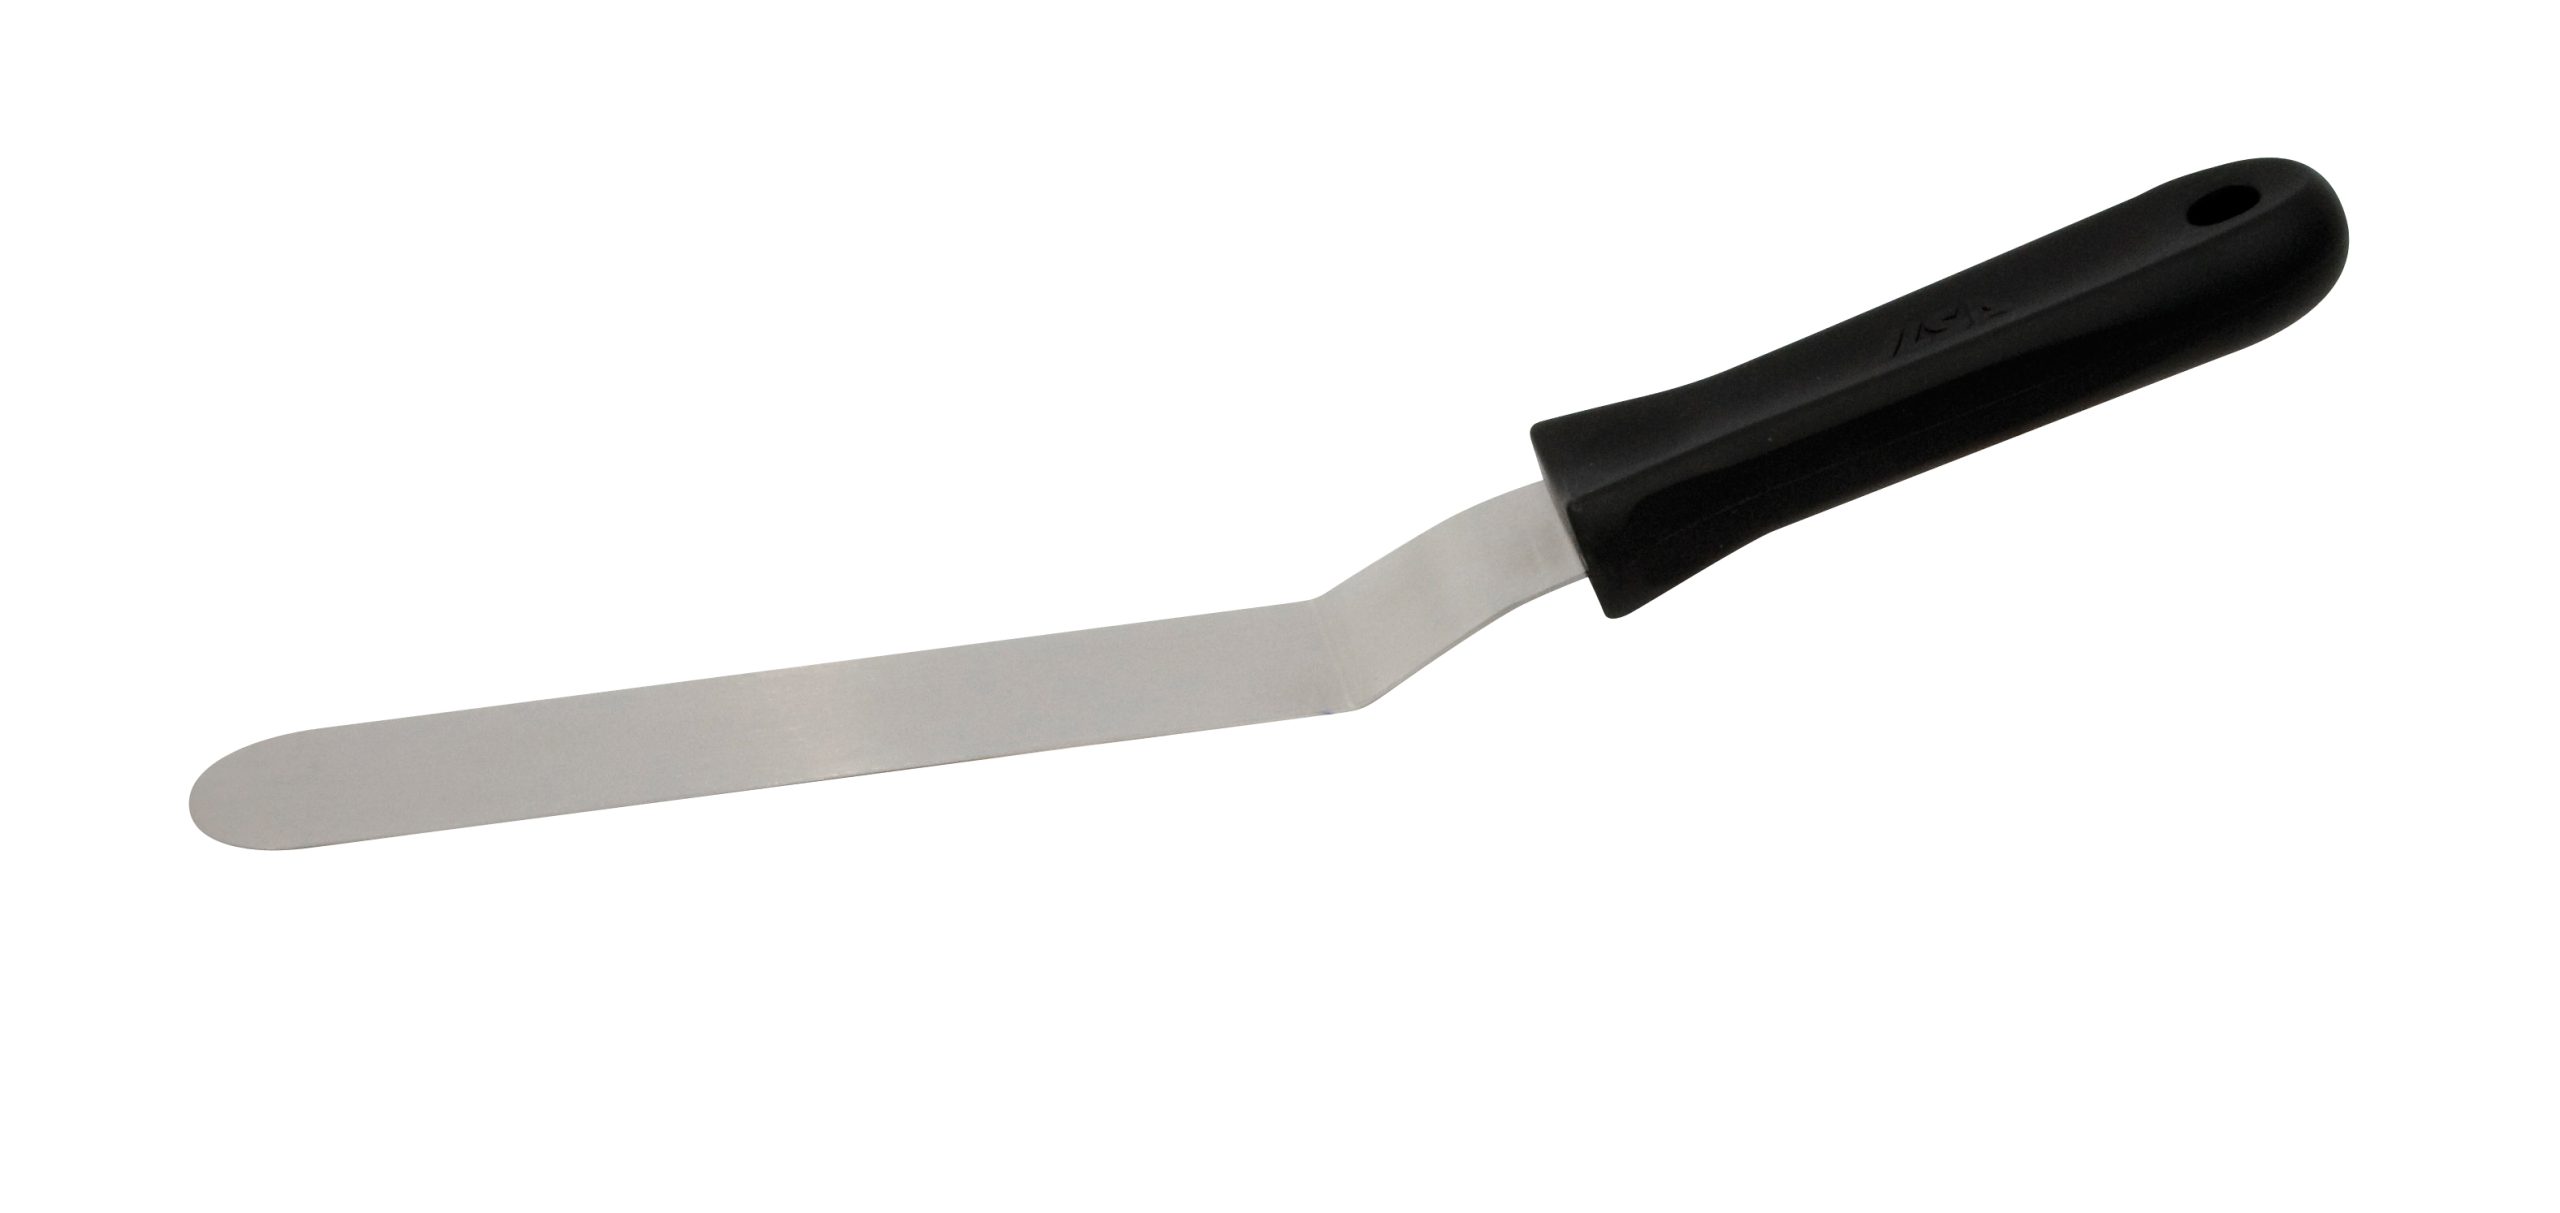 Offset spatula with tapered thickness - Stainless steel 30cm ILSA Italy